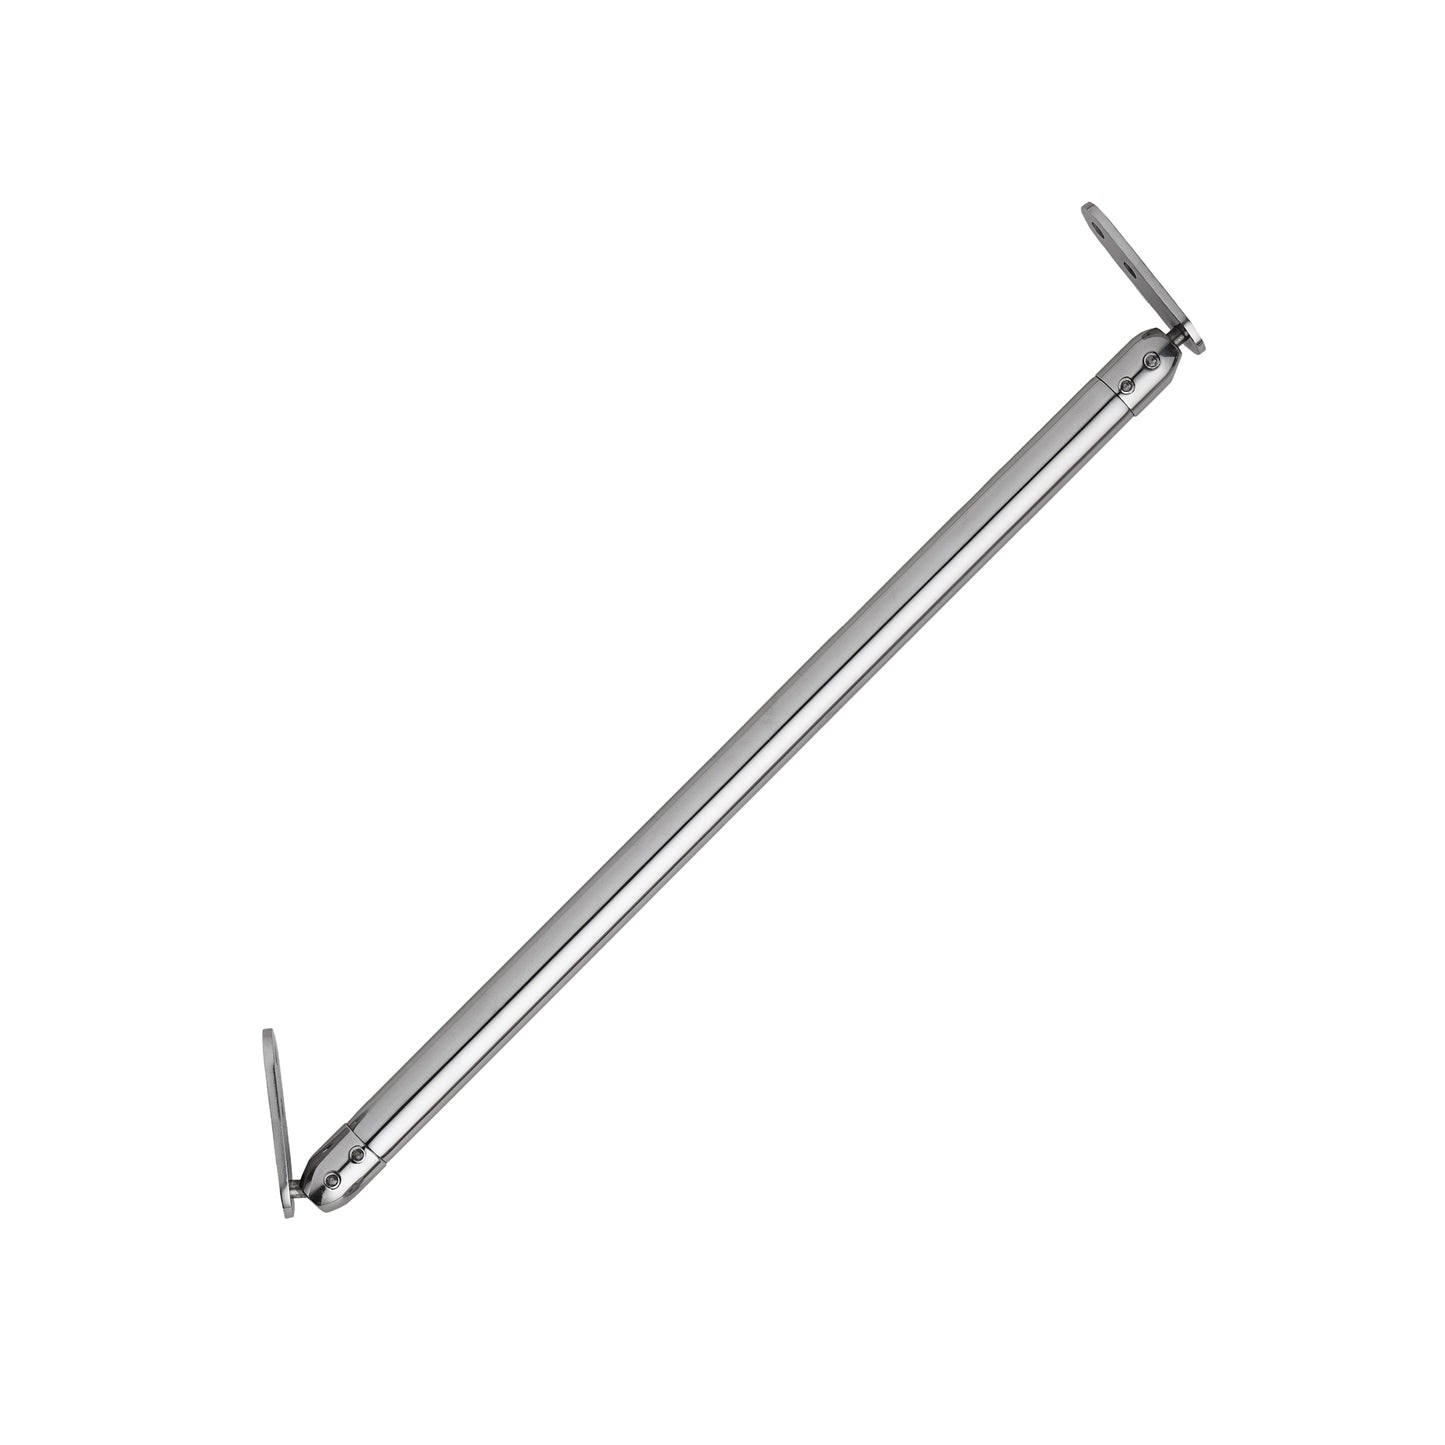 Adjustable Windshield Stanchions (11-1/4") - S-0030